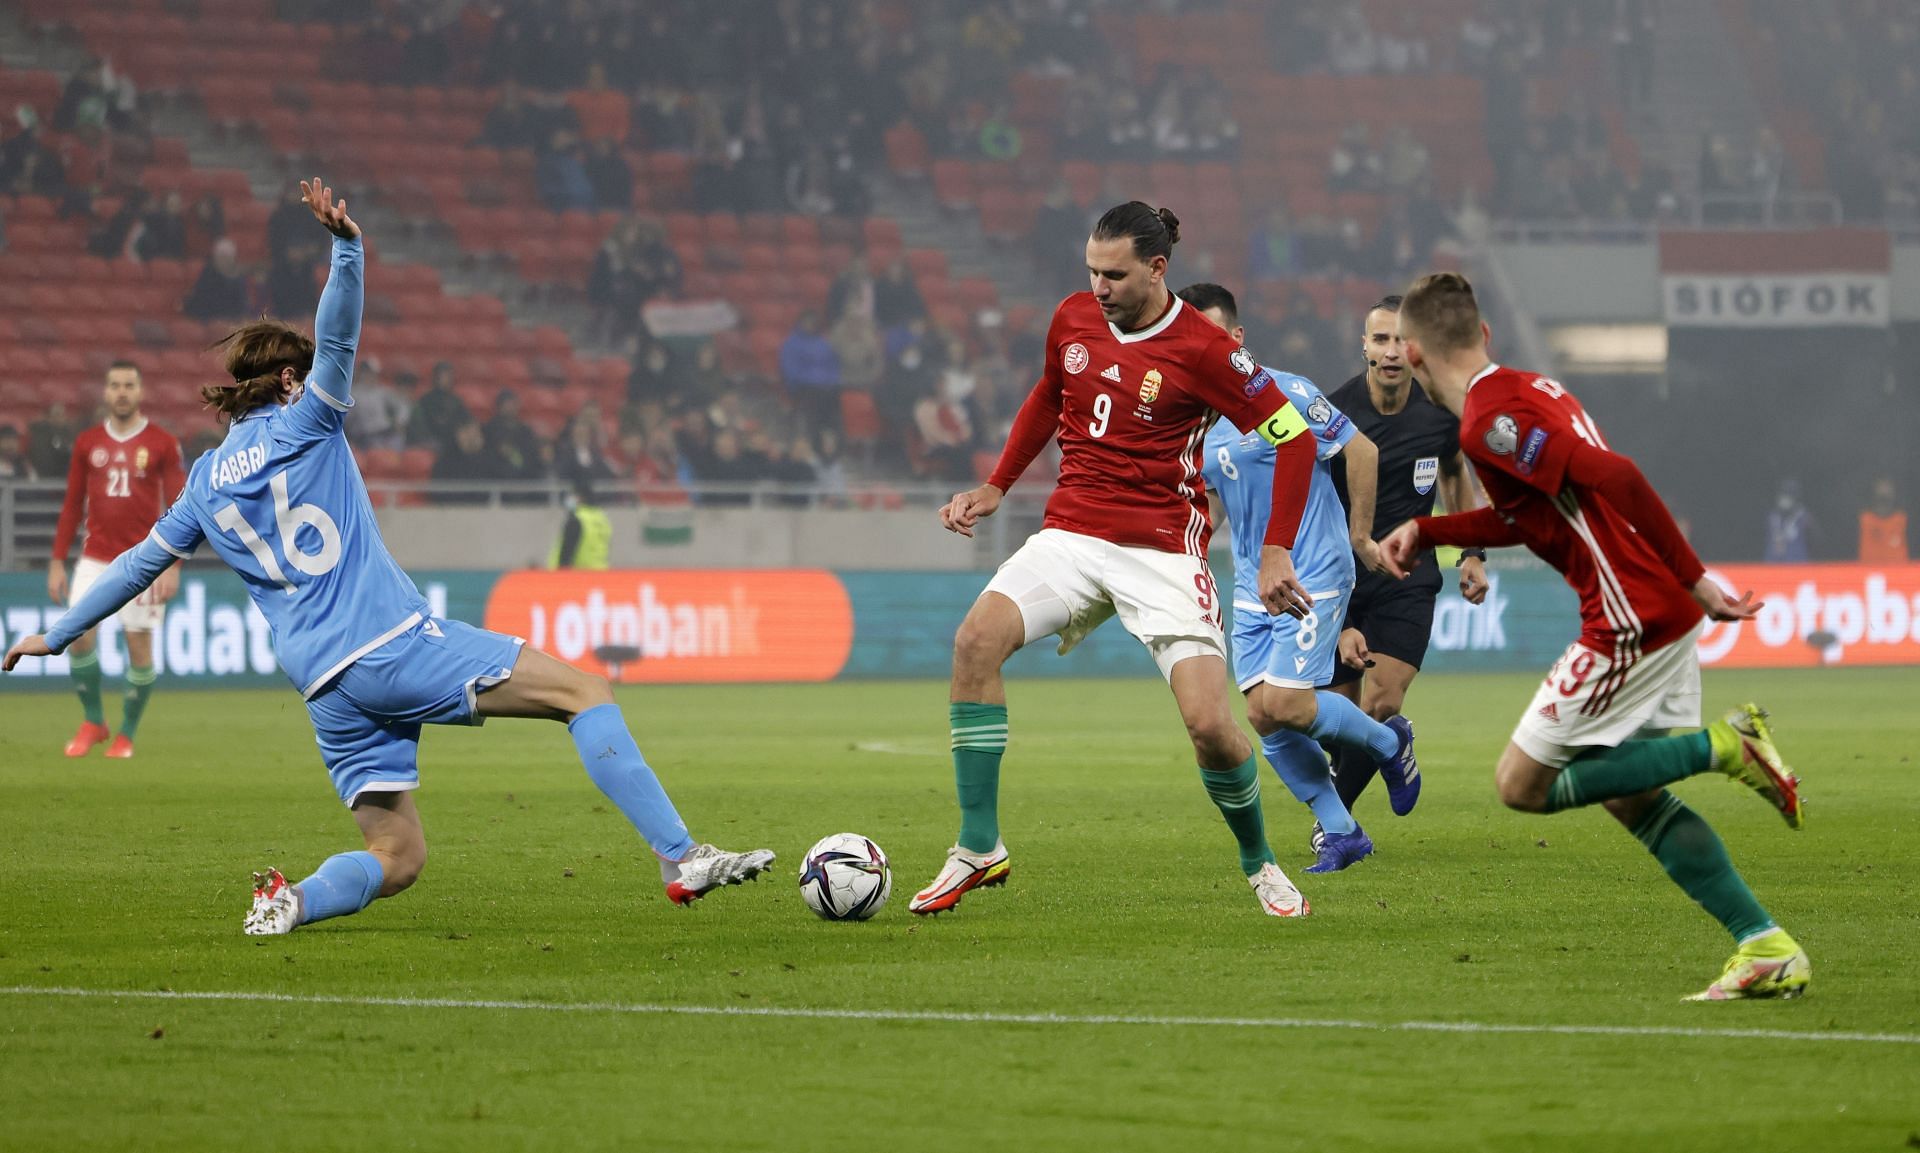 Northern Ireland and Hungary face off on Tuesday